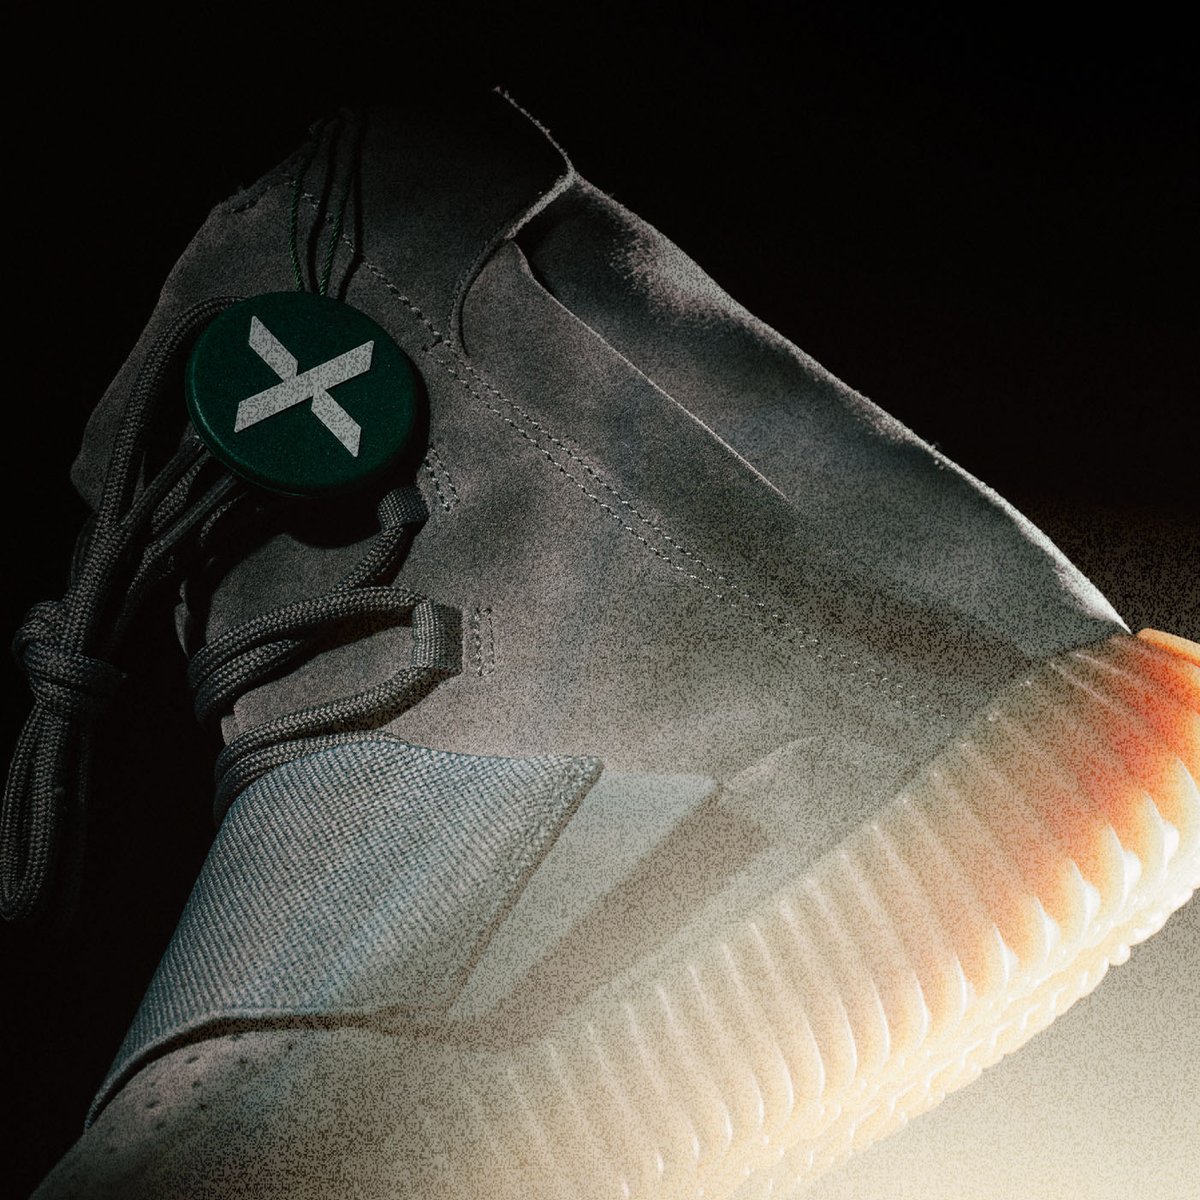 Now revealing the #MidweekHeat for this week: adidas Yeezy Boost 750 Light Grey Glow In the Dark 🔥 Get ready, bidding opens tomorrow at 12PM EST. More details: bit.ly/3uUfuy4